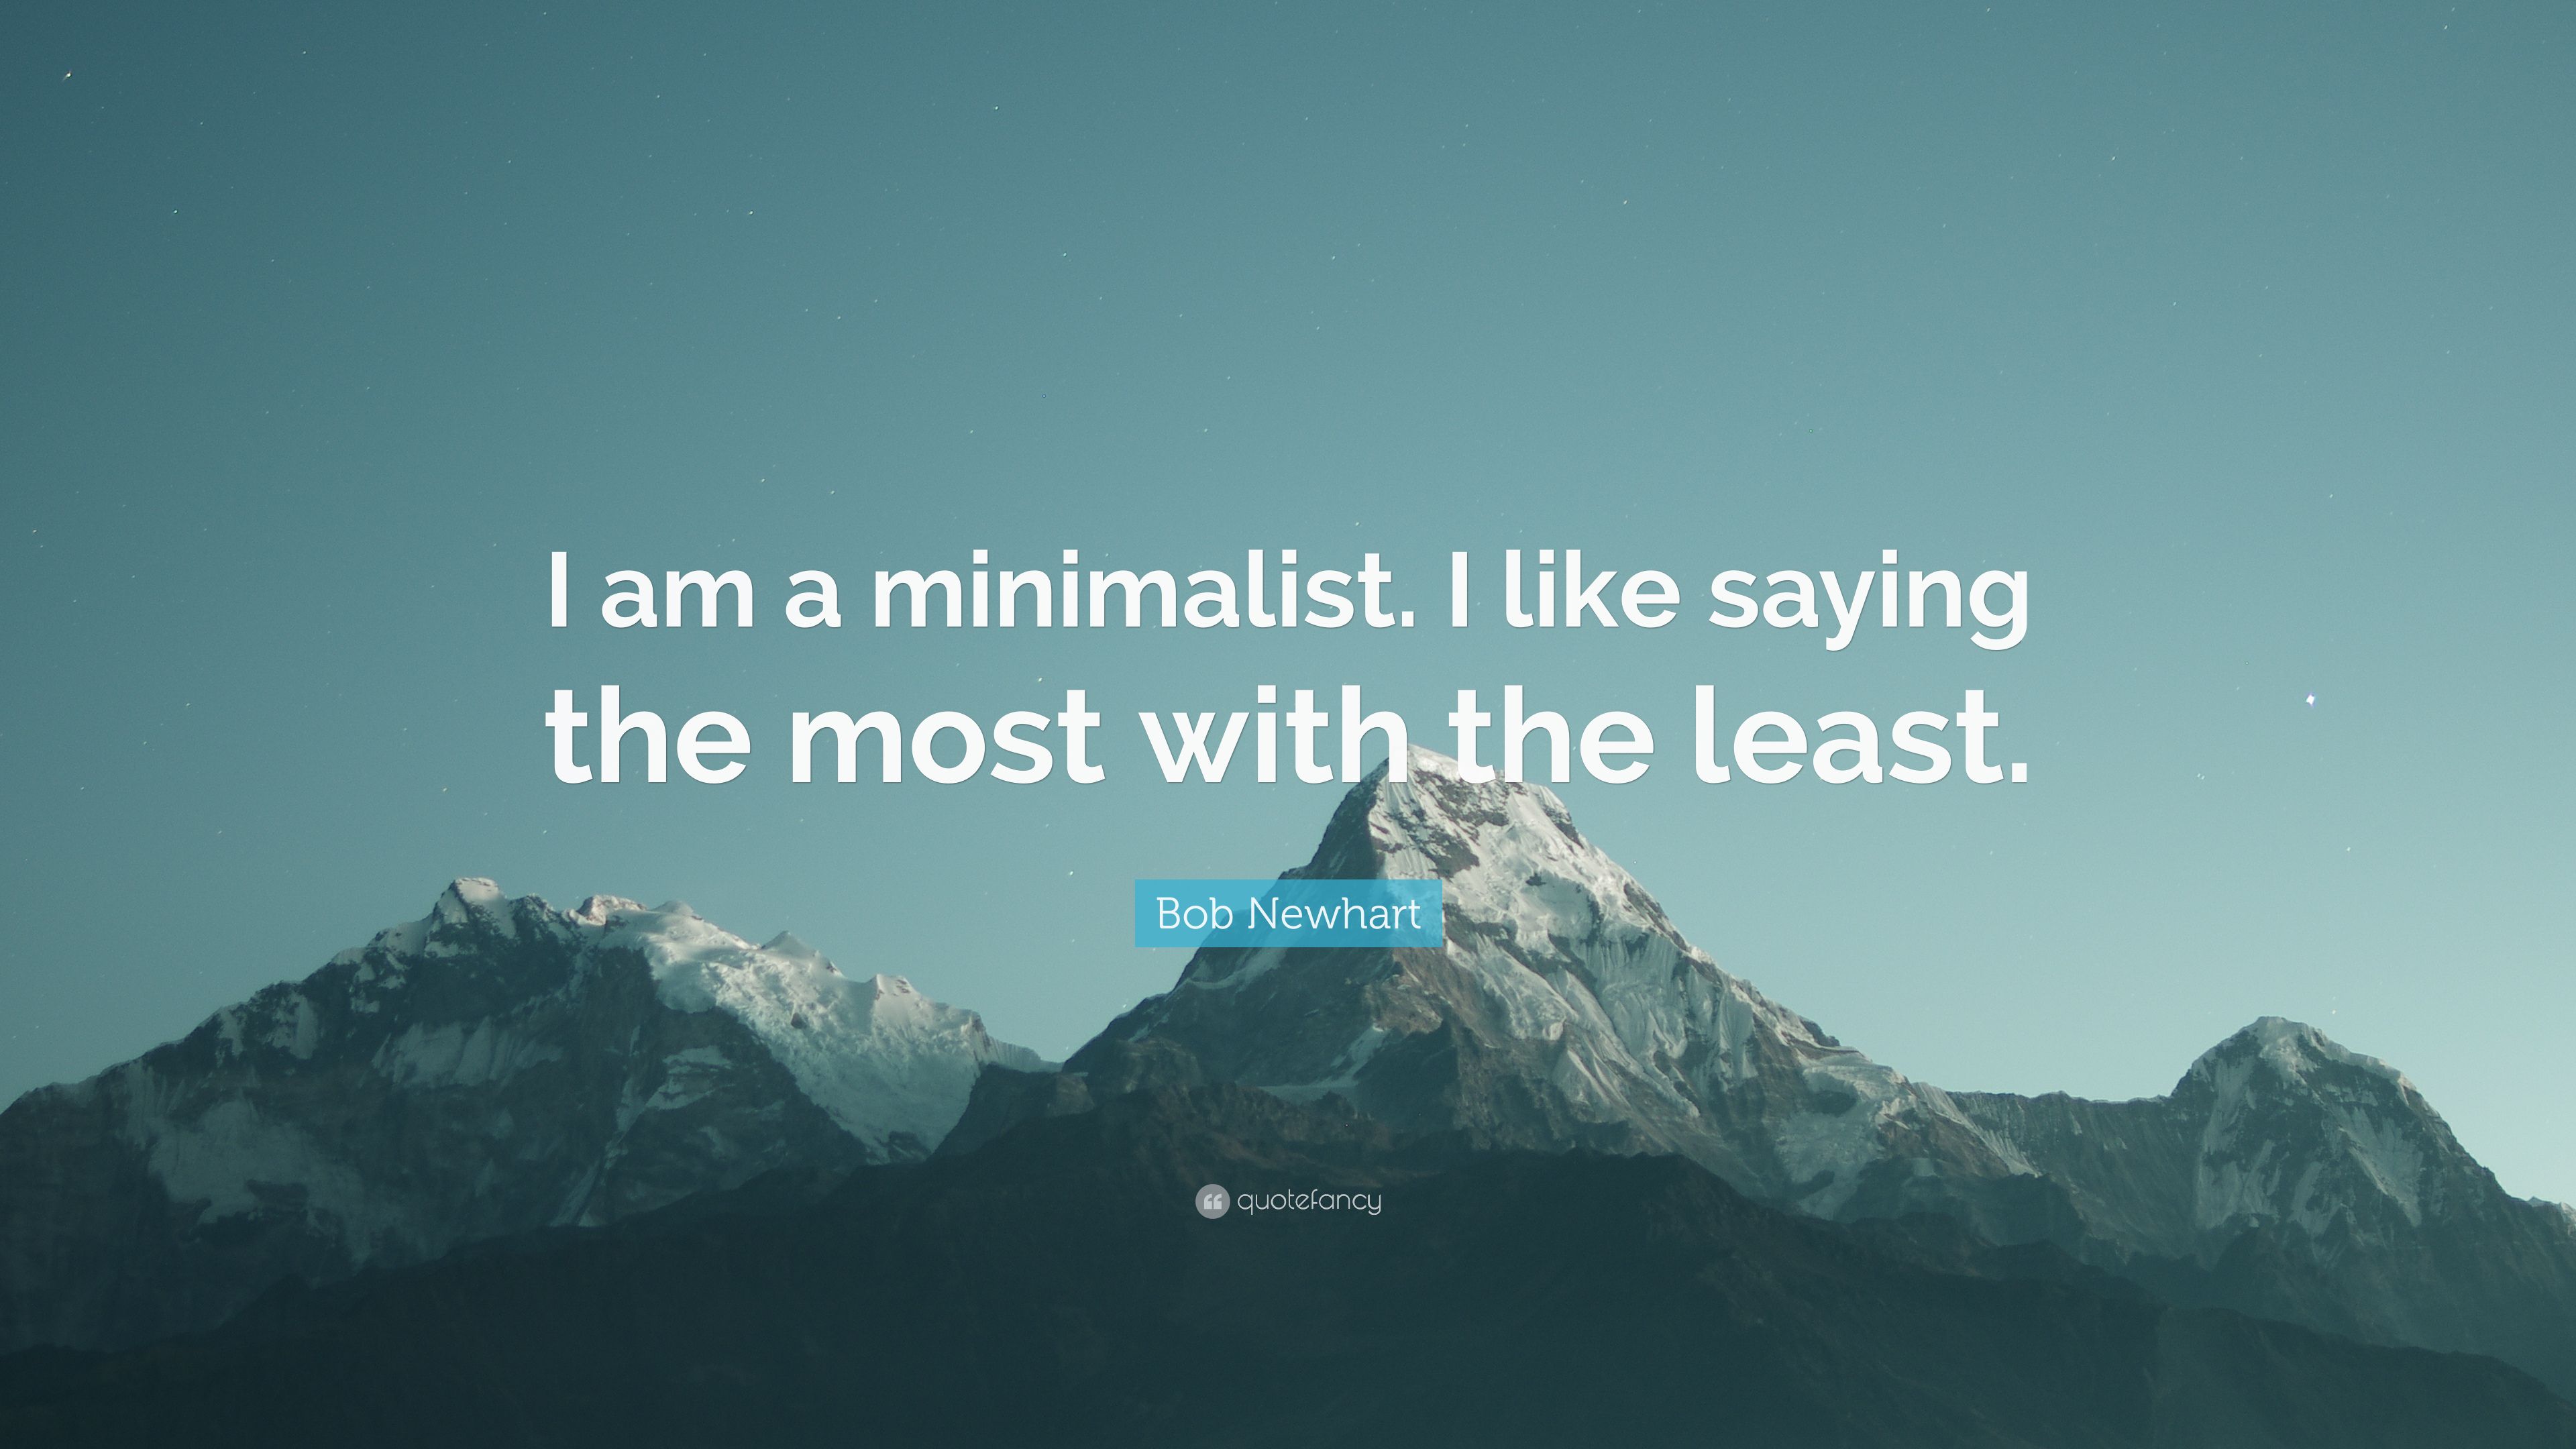 Bob Newhart Quote: “I am a minimalist. I like saying the most with the least.” (9 wallpaper)